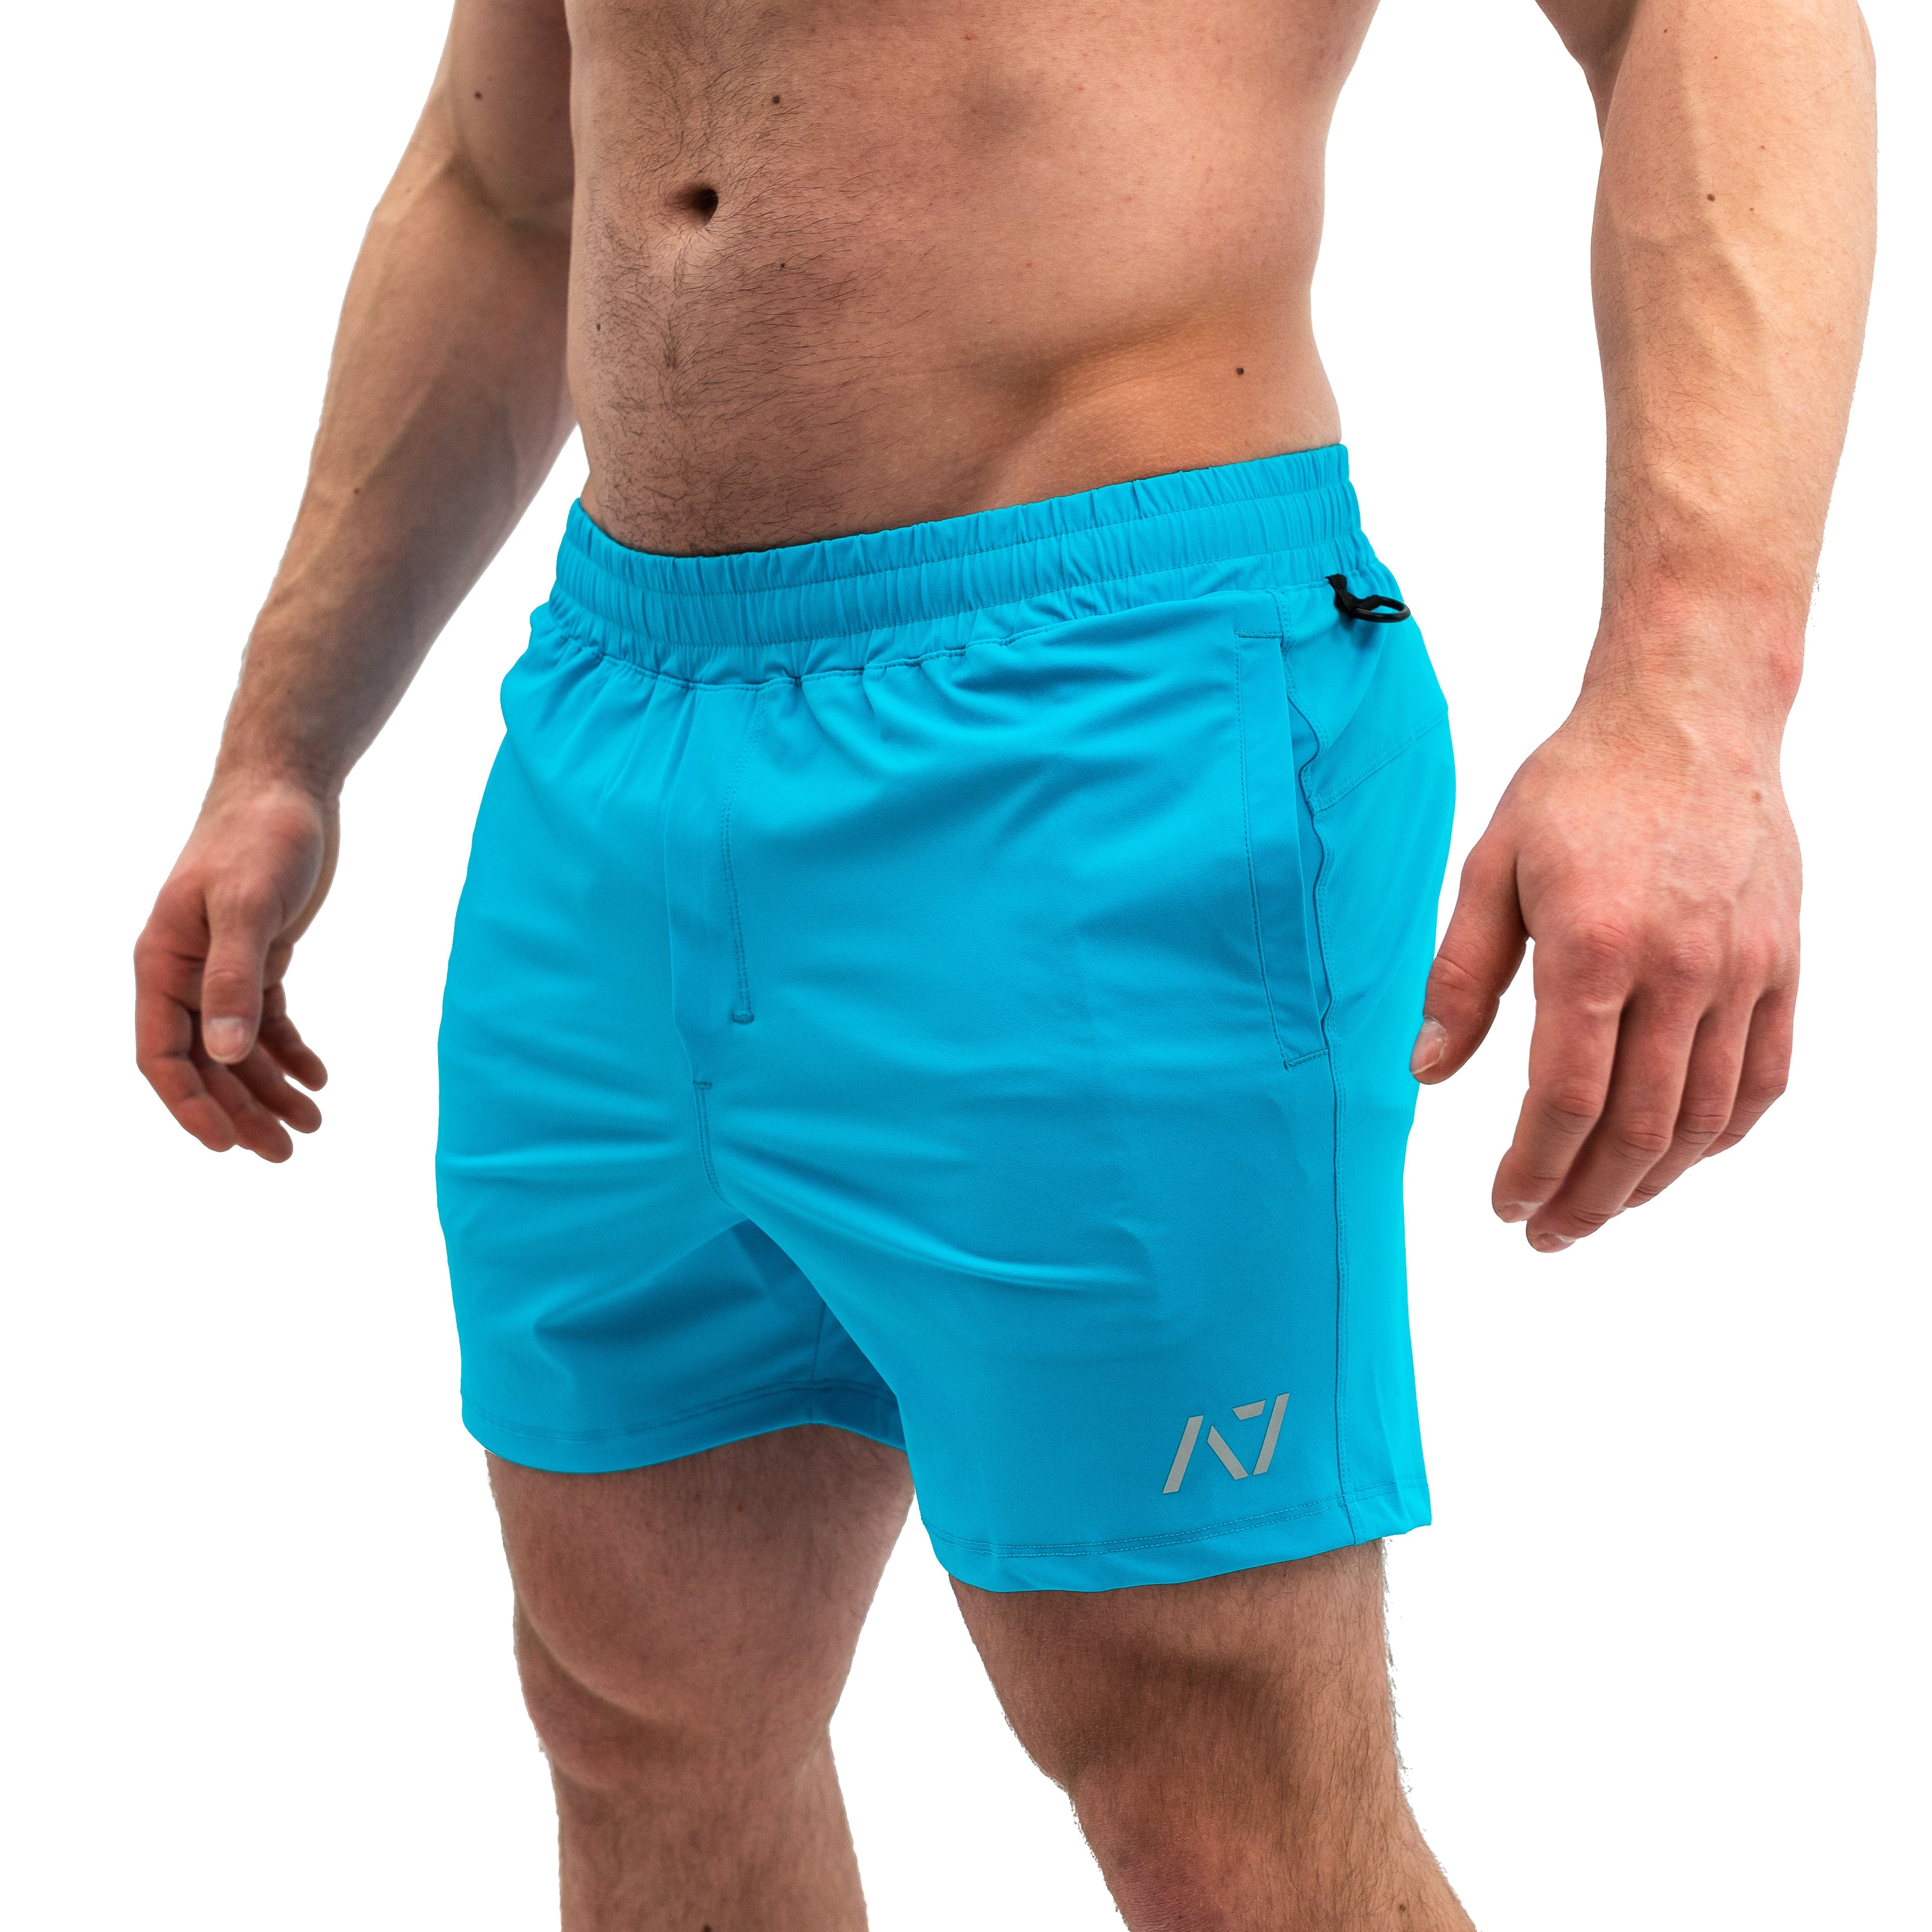 Electric Blue 360-GO KWD shorts were created to provide the flexibility for all the movements in your training while offering the comfort and fit you have come to love through our KWD shorts. Purchase 360-GO KWD shorts from A7 UK and A7 Europe. 360-GO KWD shorts are perfect for powerlifting and weightlifting training. Available in UK and Europe including France, Italy, Germany, the Netherlands, Sweden and Poland.